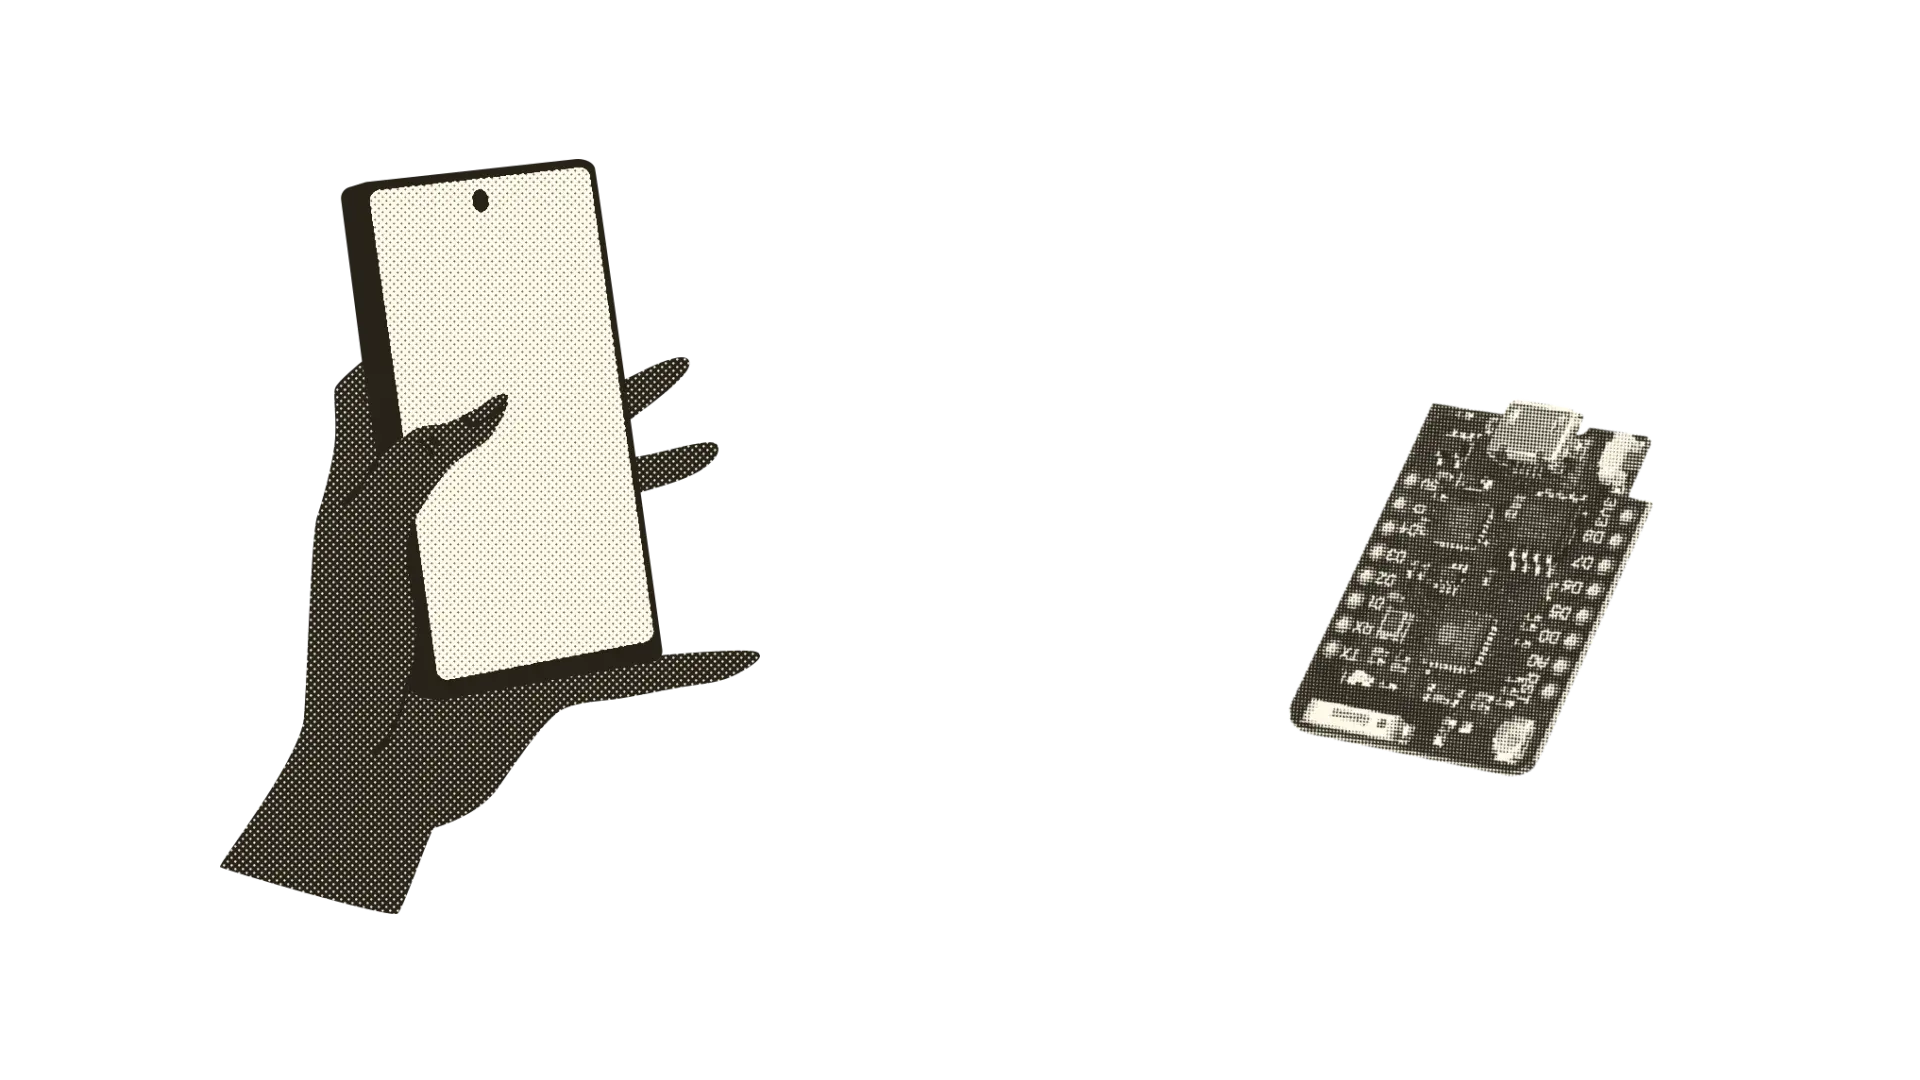 Animation of a WEMOS D1 Mini pro sending a signal to a cellphone help by a floating hand